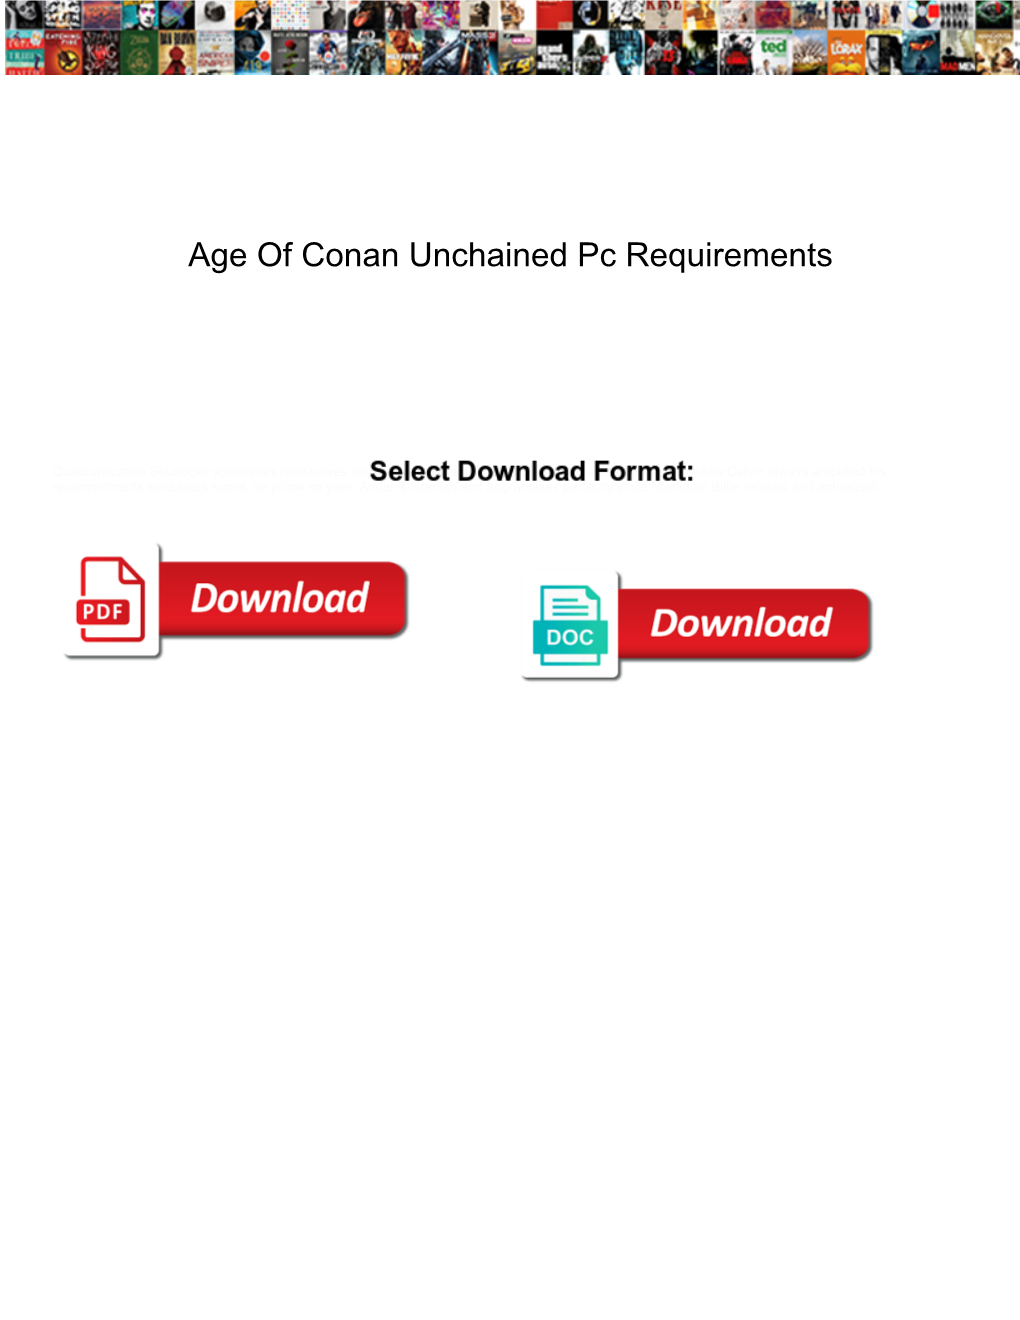 Age of Conan Unchained Pc Requirements